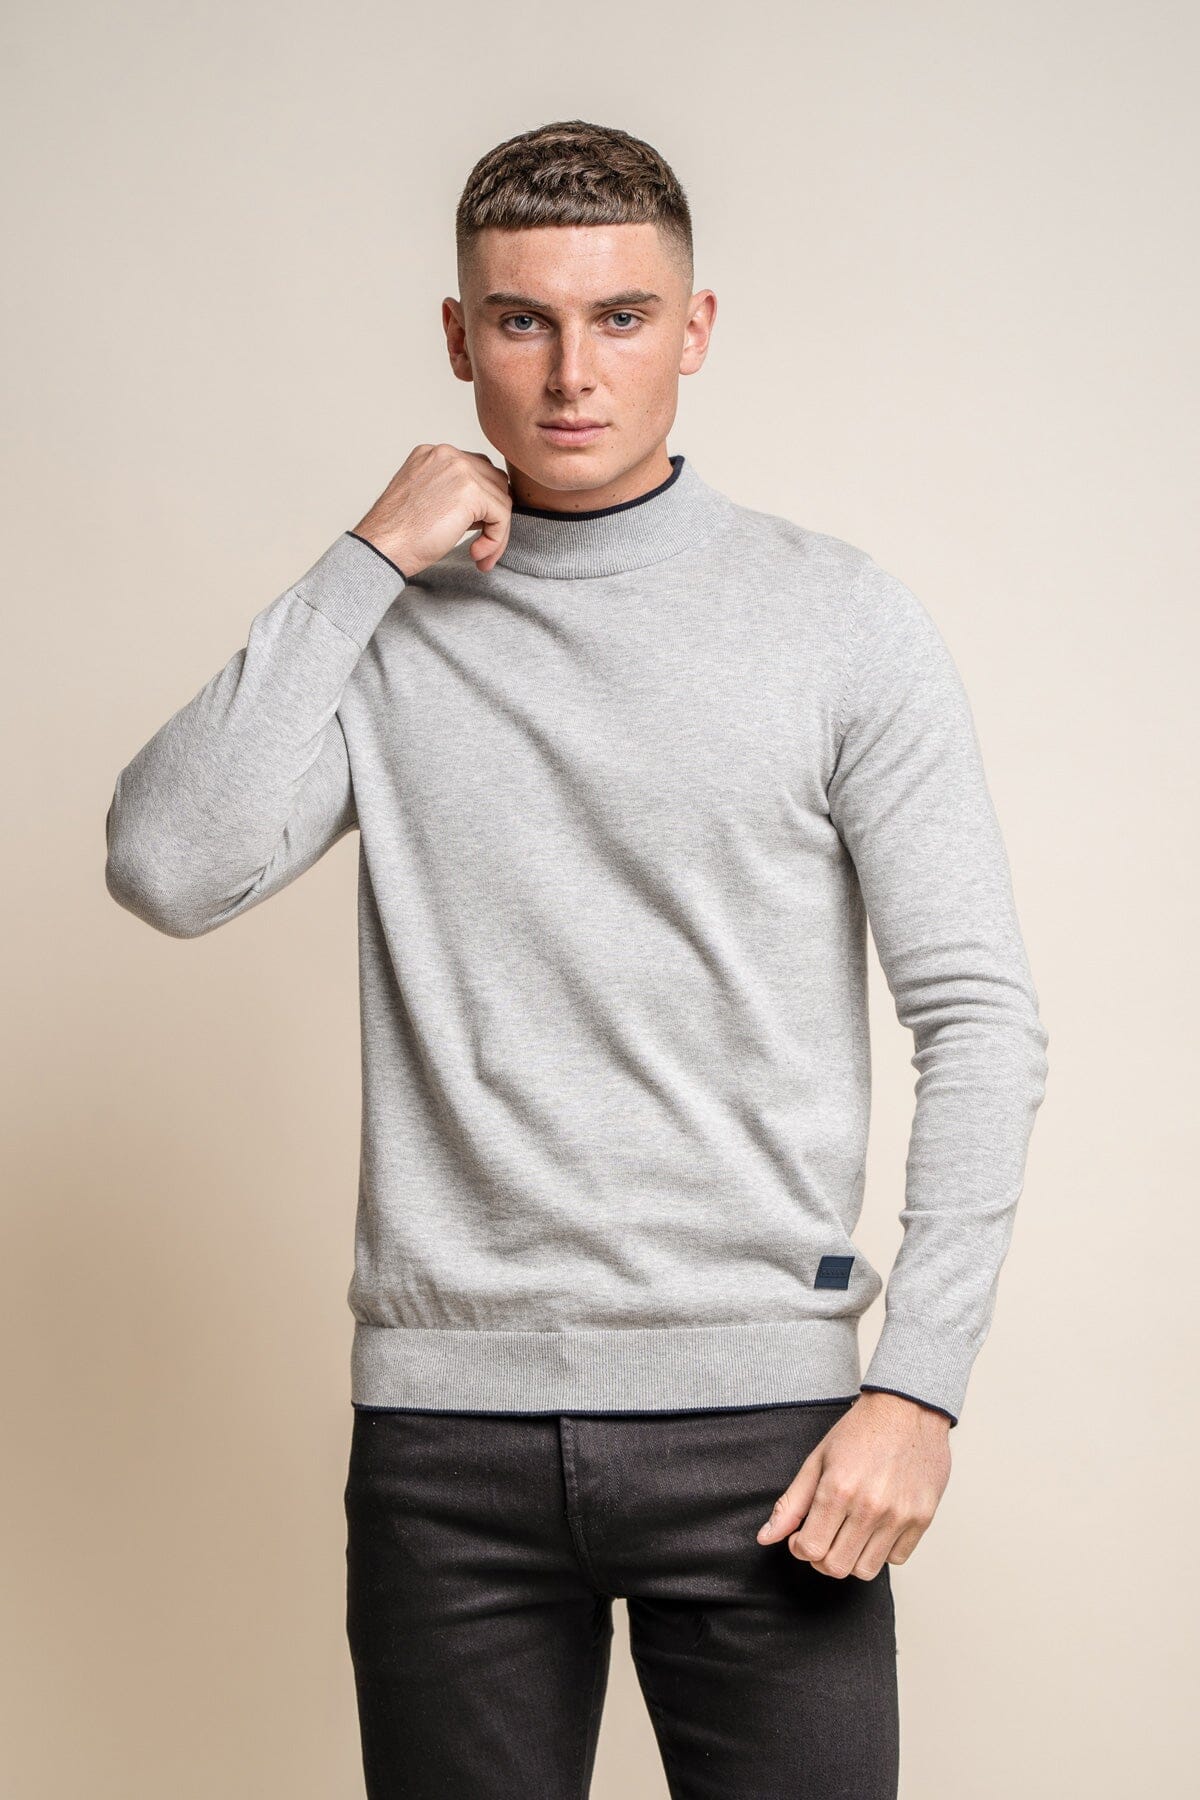 Rio Grey Turtle Neck Jumper - Jumpers - S 